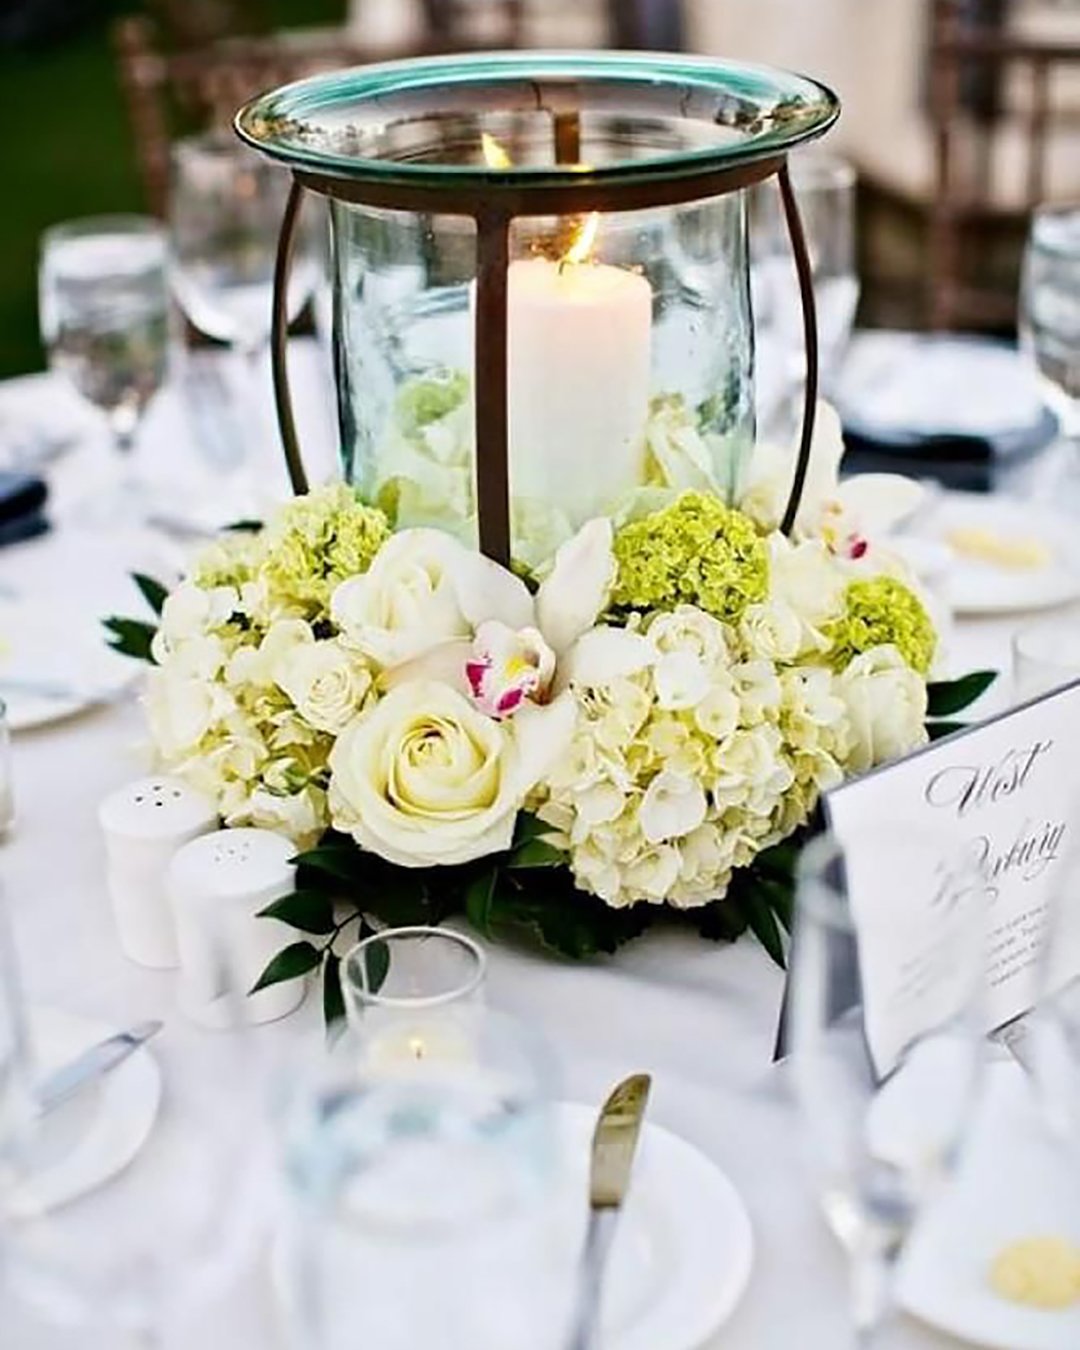 wedding table decorations candle with flowers jennifer bowen photography